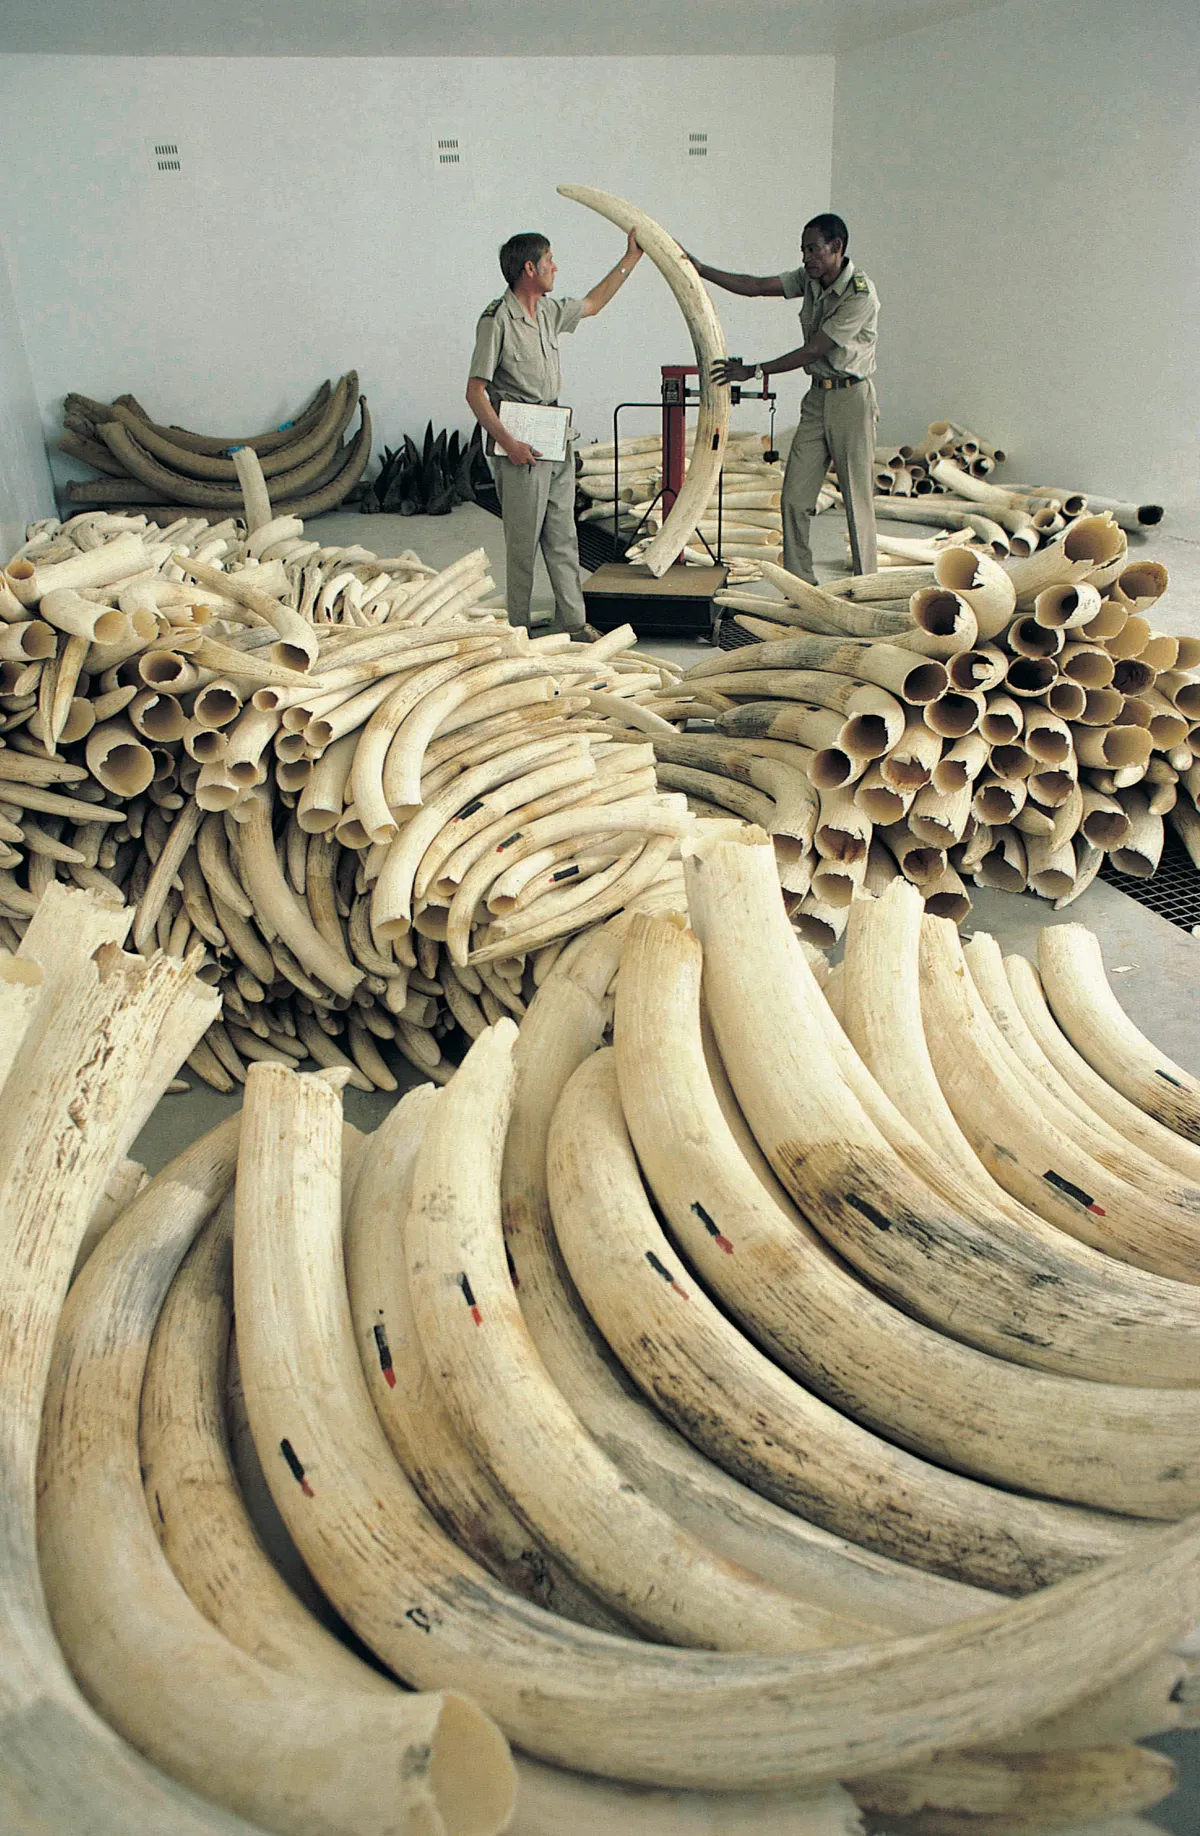 Demand for ivory has helped to fuel a multibillion-dollar wildlife trade that encourages illegal hunting © Getty Images